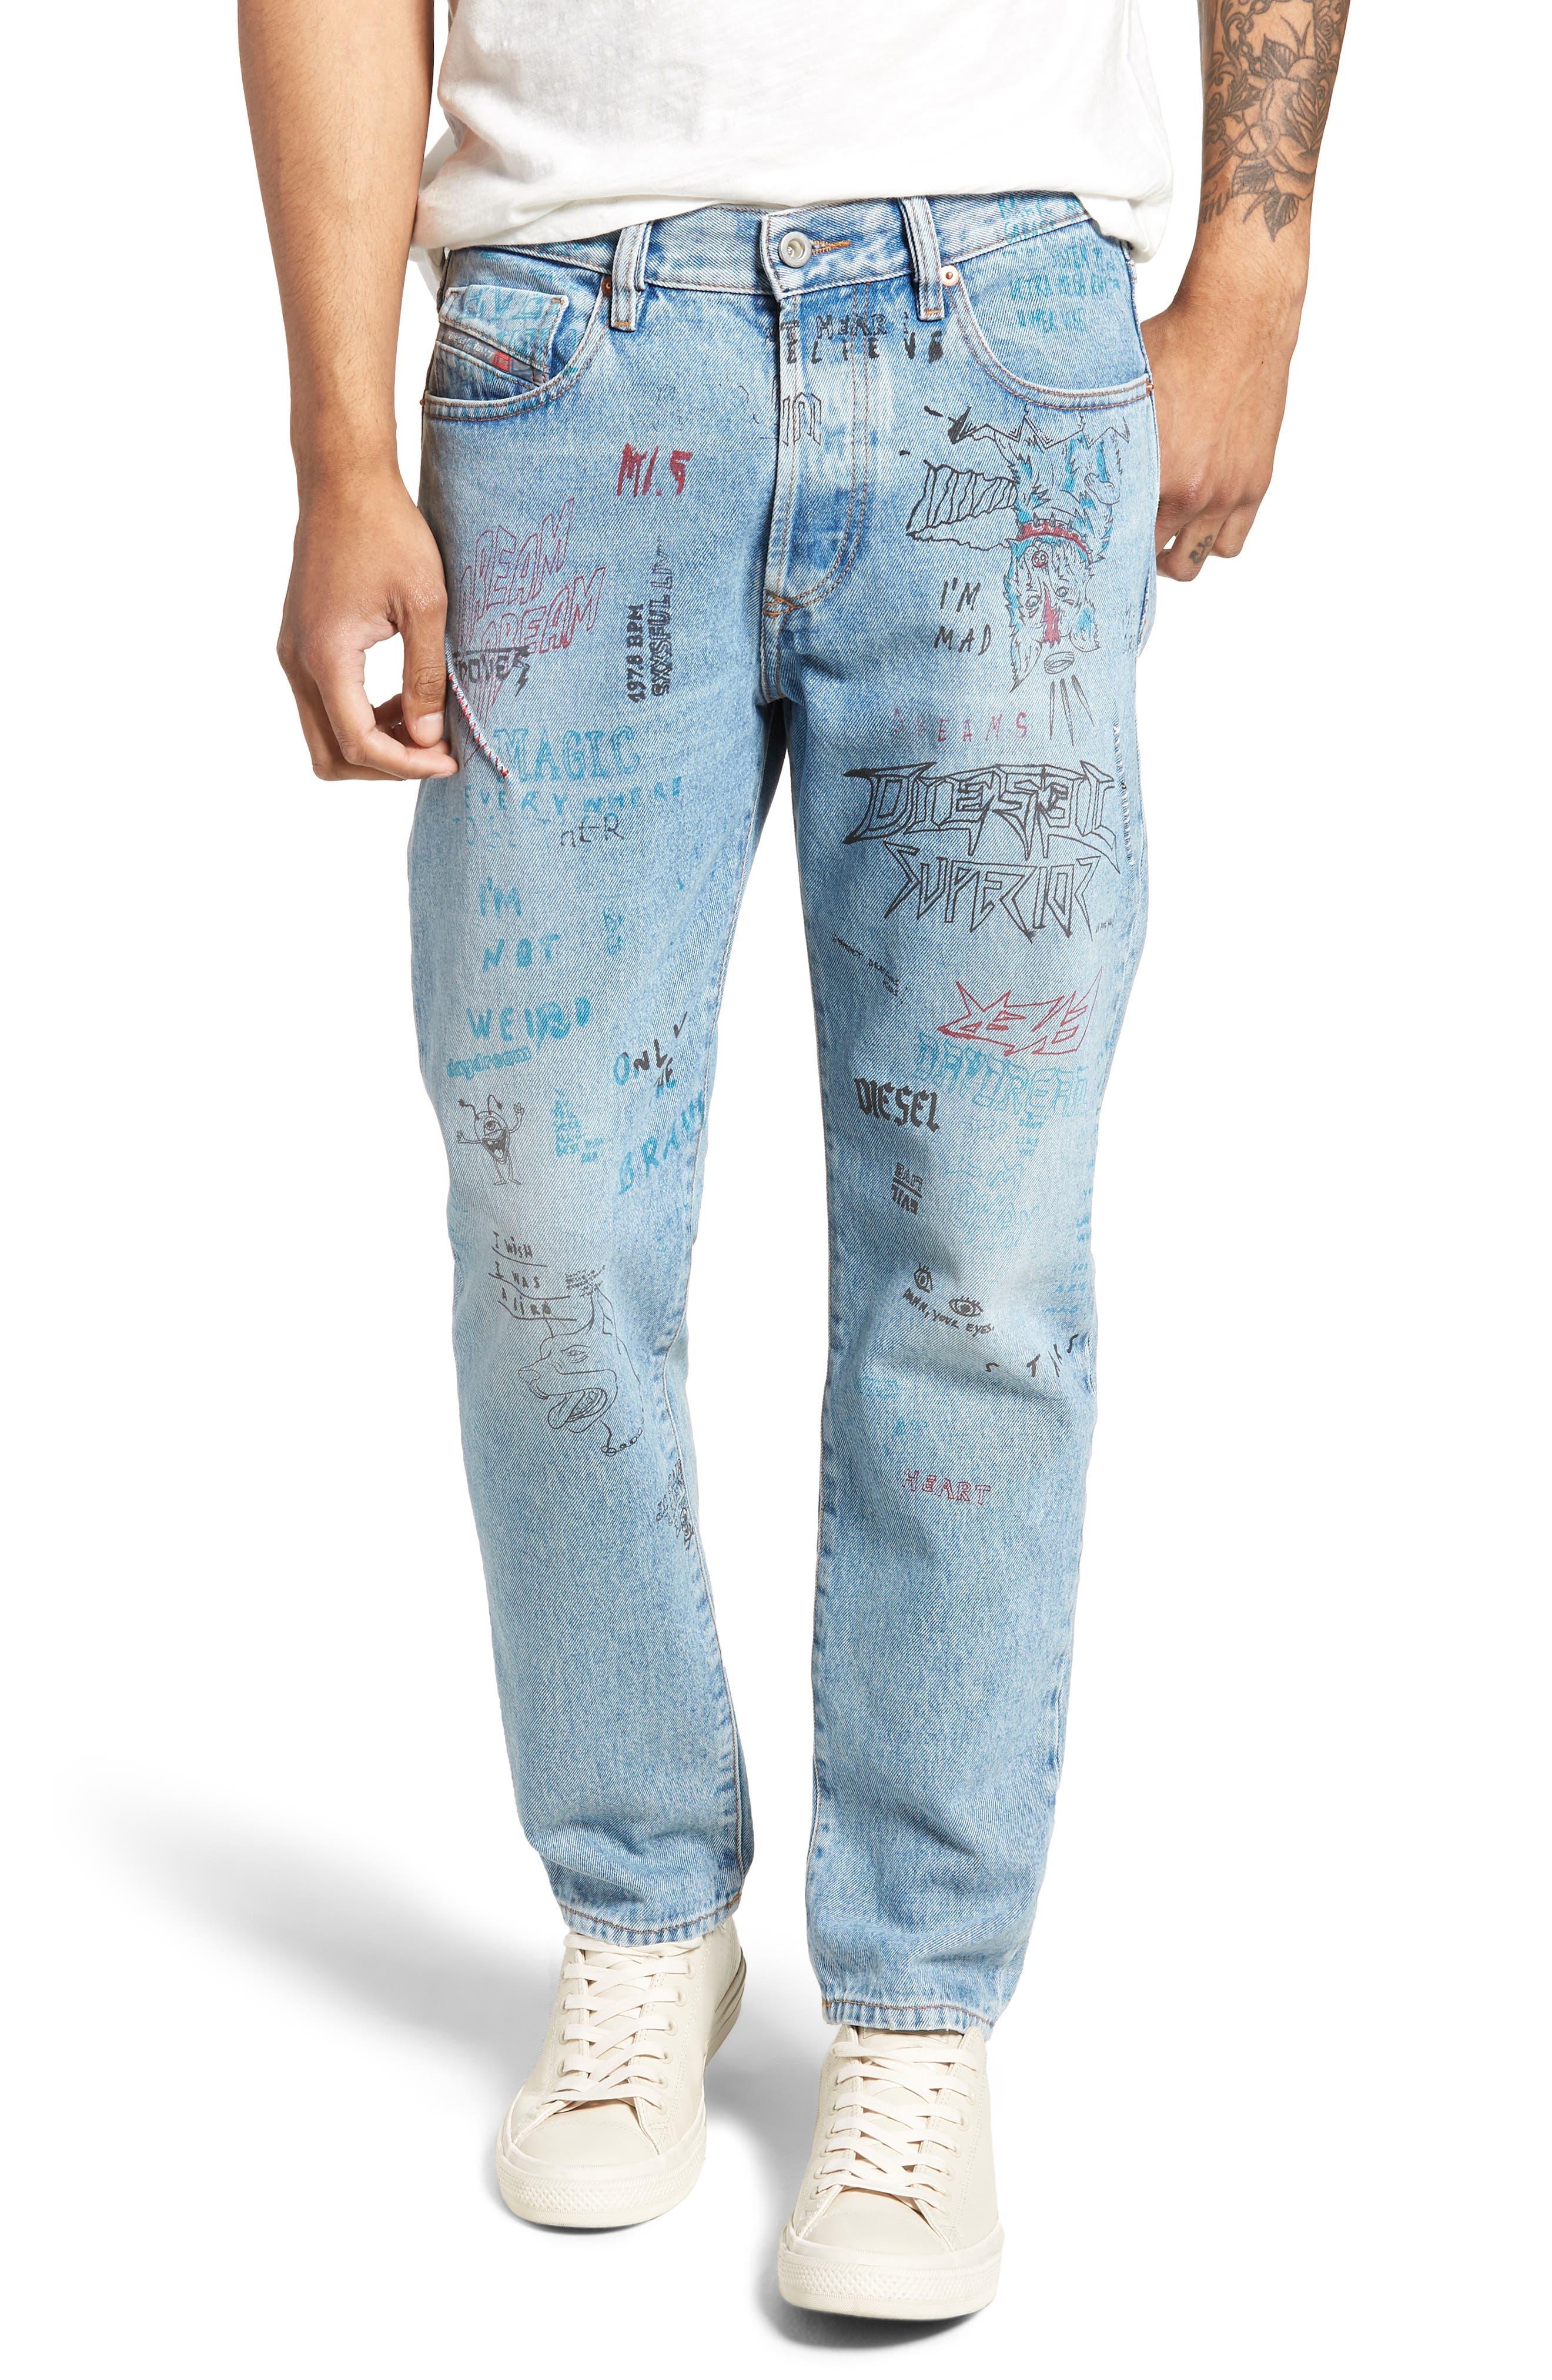 design my own jeans